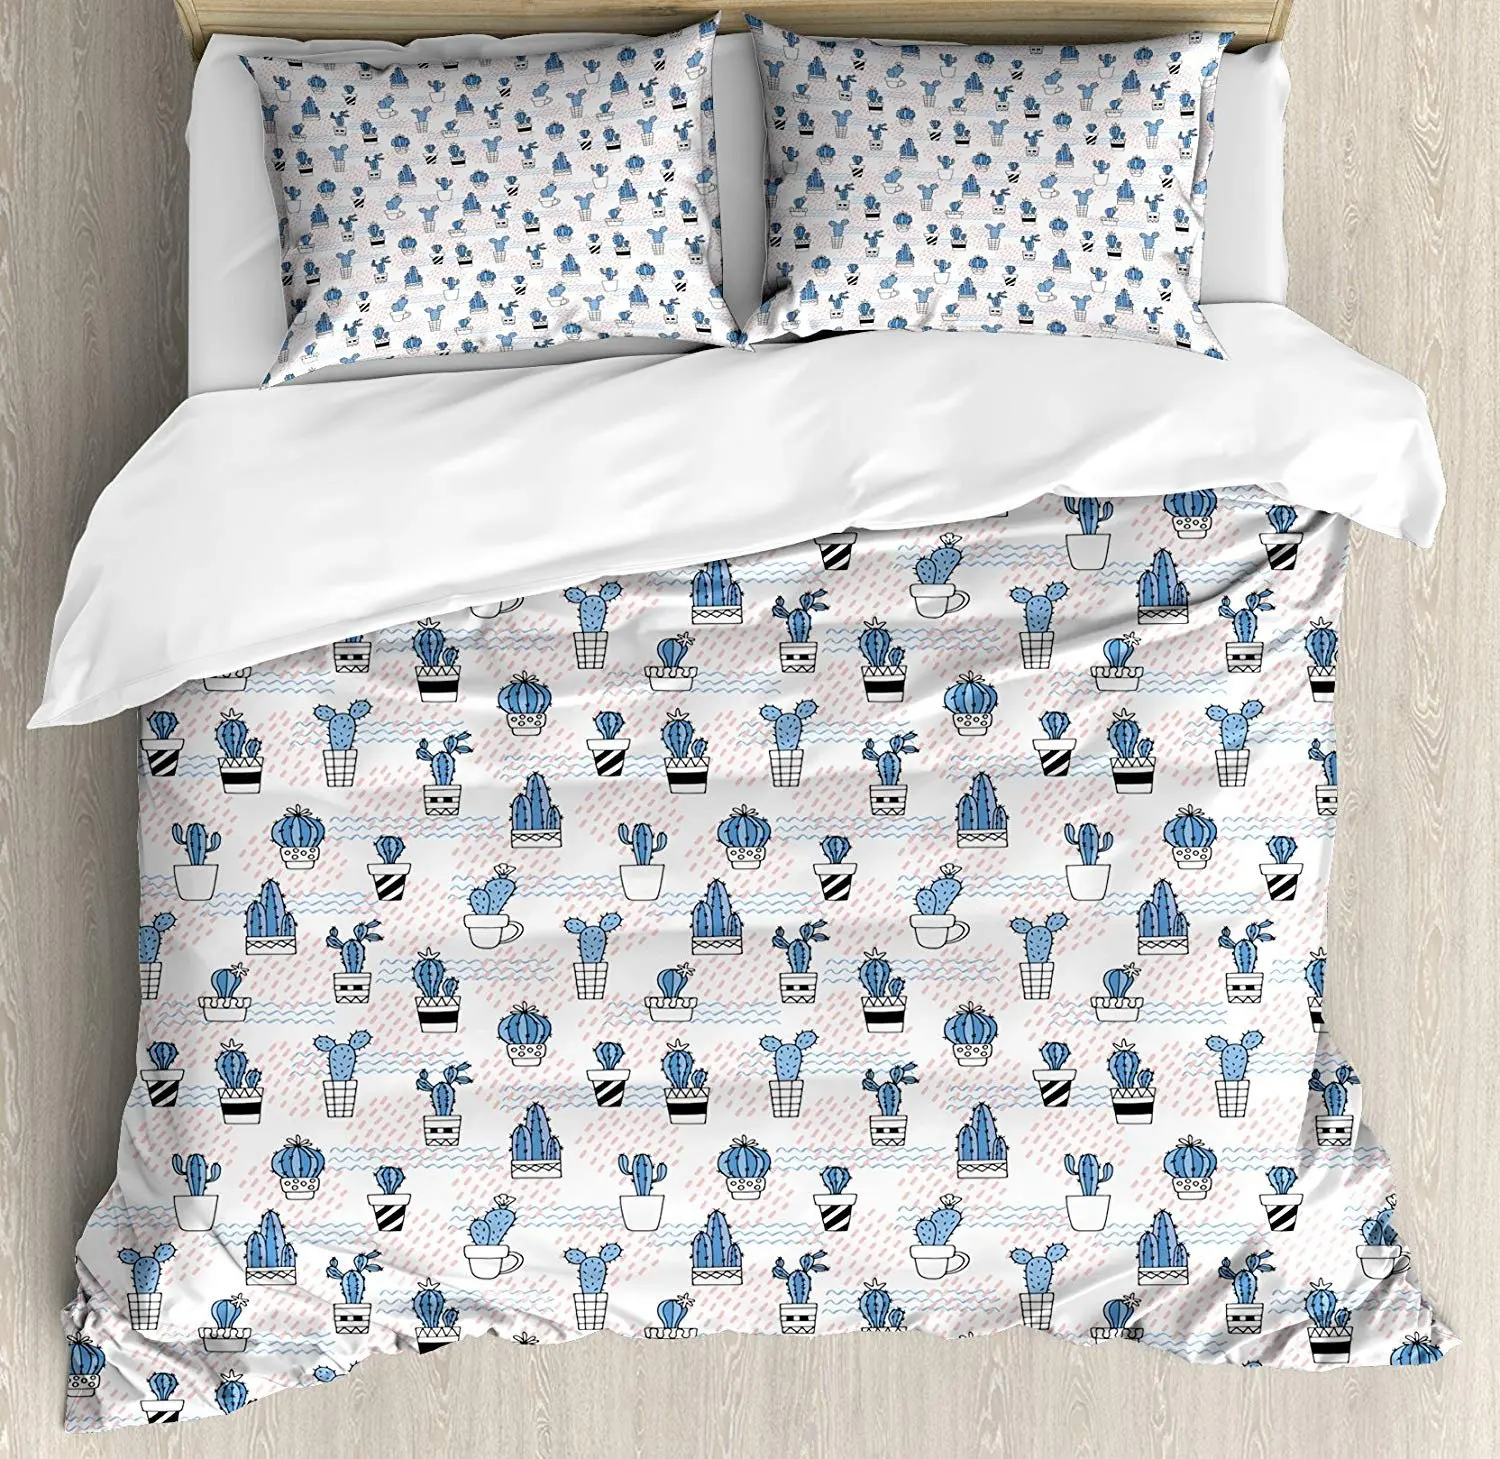 

Cactus Bedding Set Cute Zigzag Pattern with Diagonal Short Lines Squares and Dots Design Duvet Cover Set Pillowcase for Home